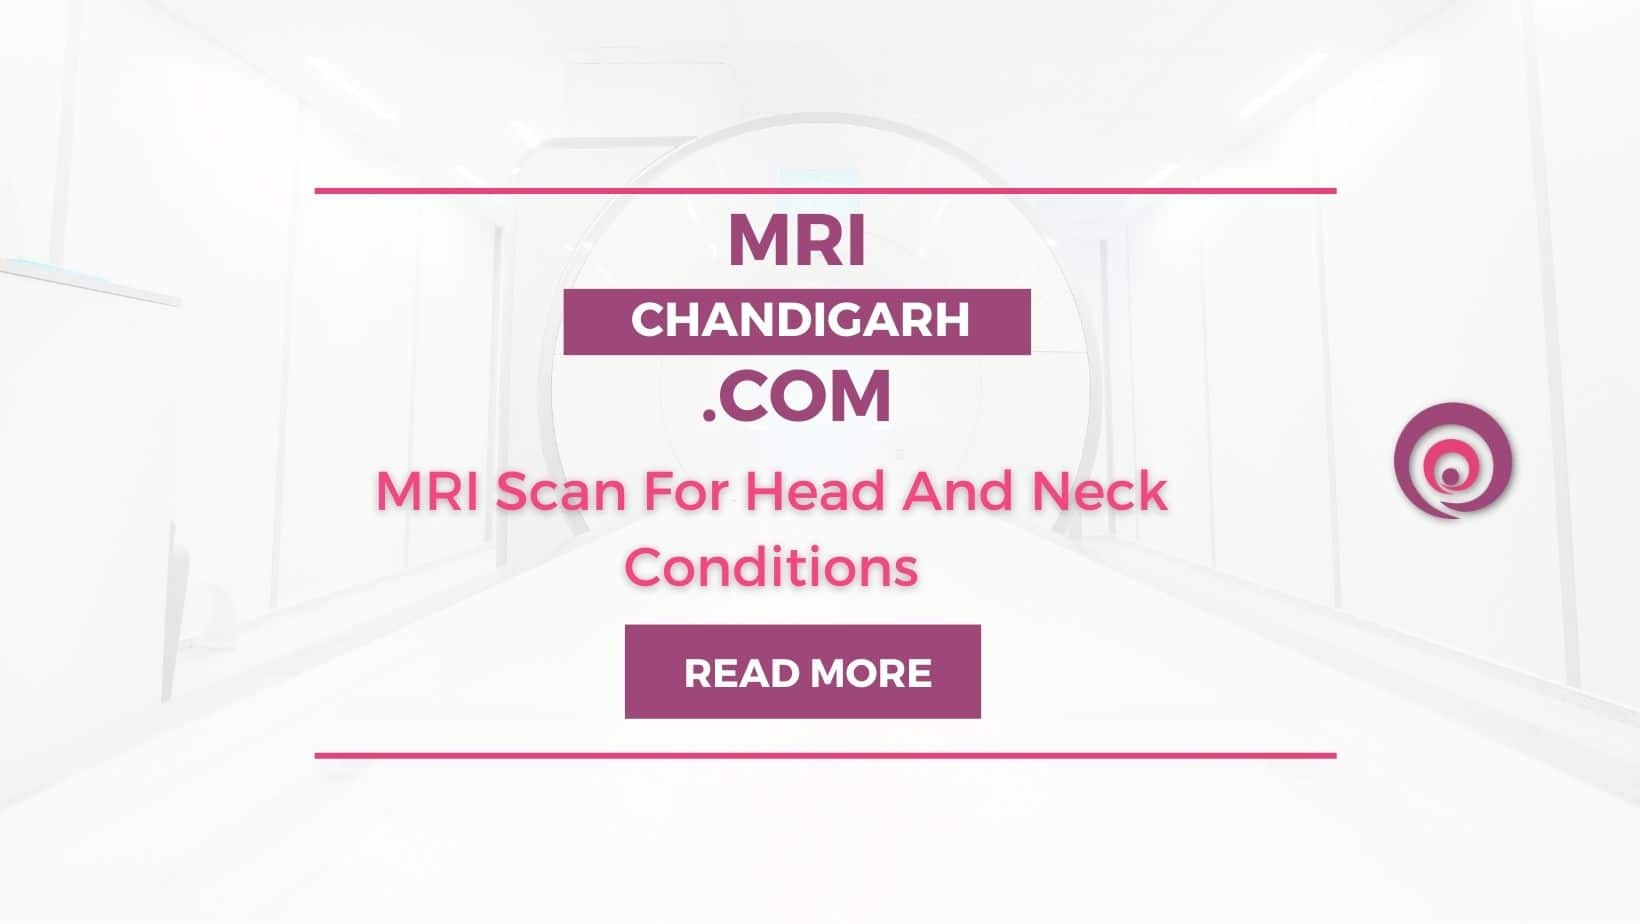 MRI Scan For Head And Neck Conditions: What, When, Why, and How? 